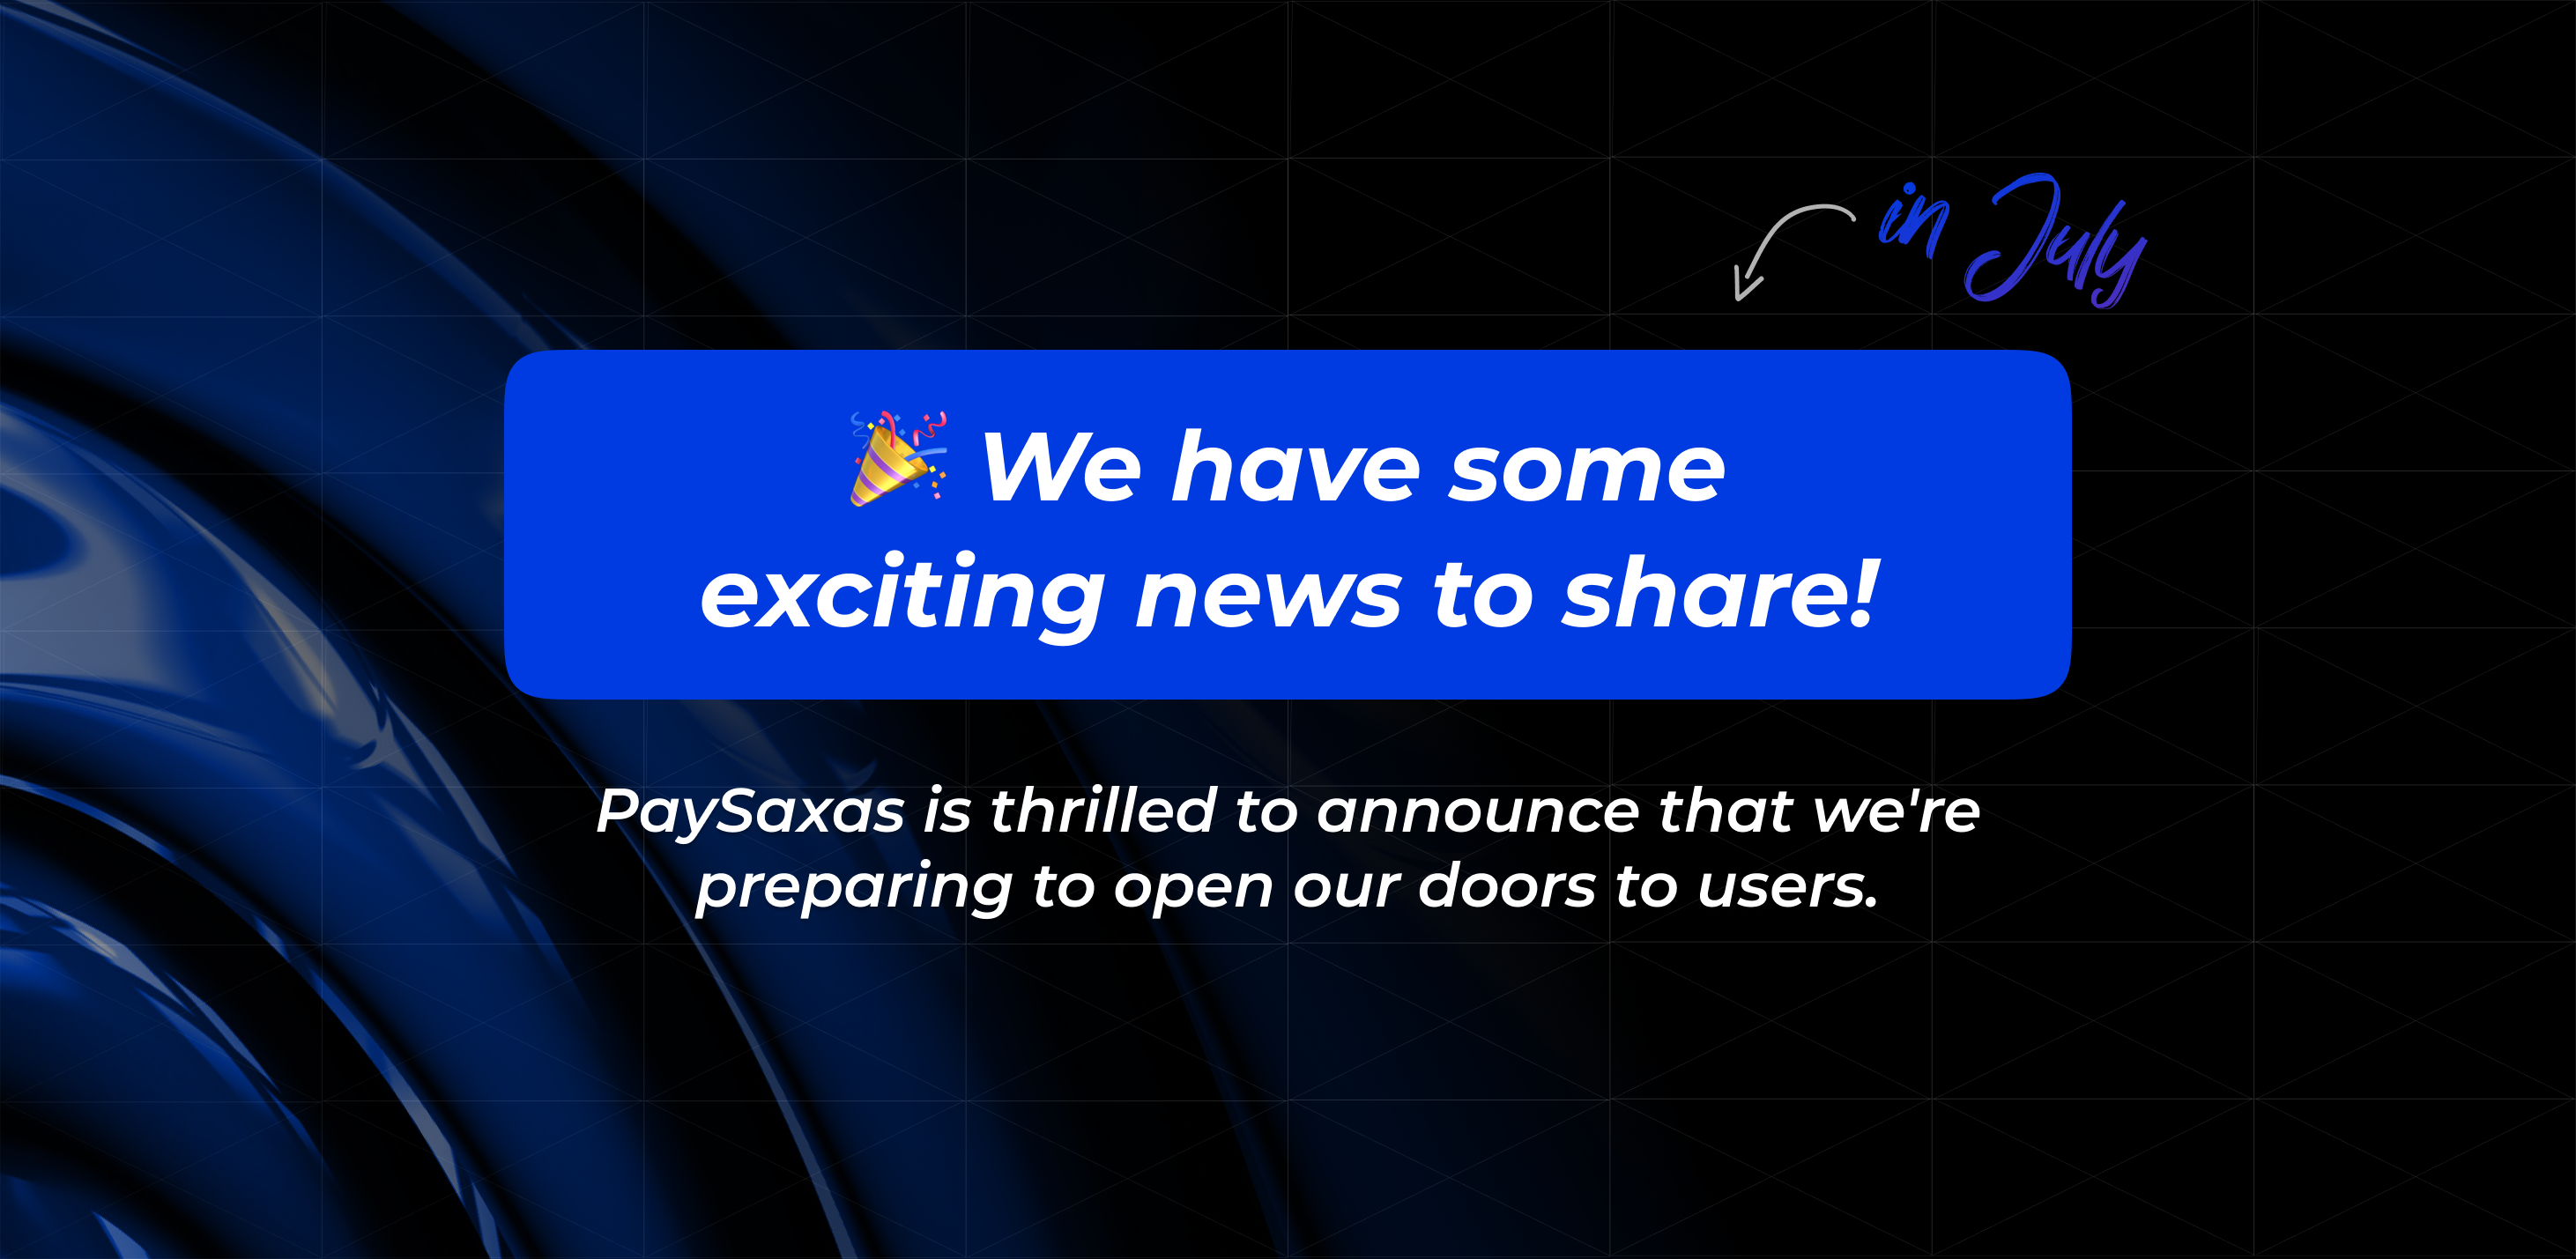 We have some exciting news to share!